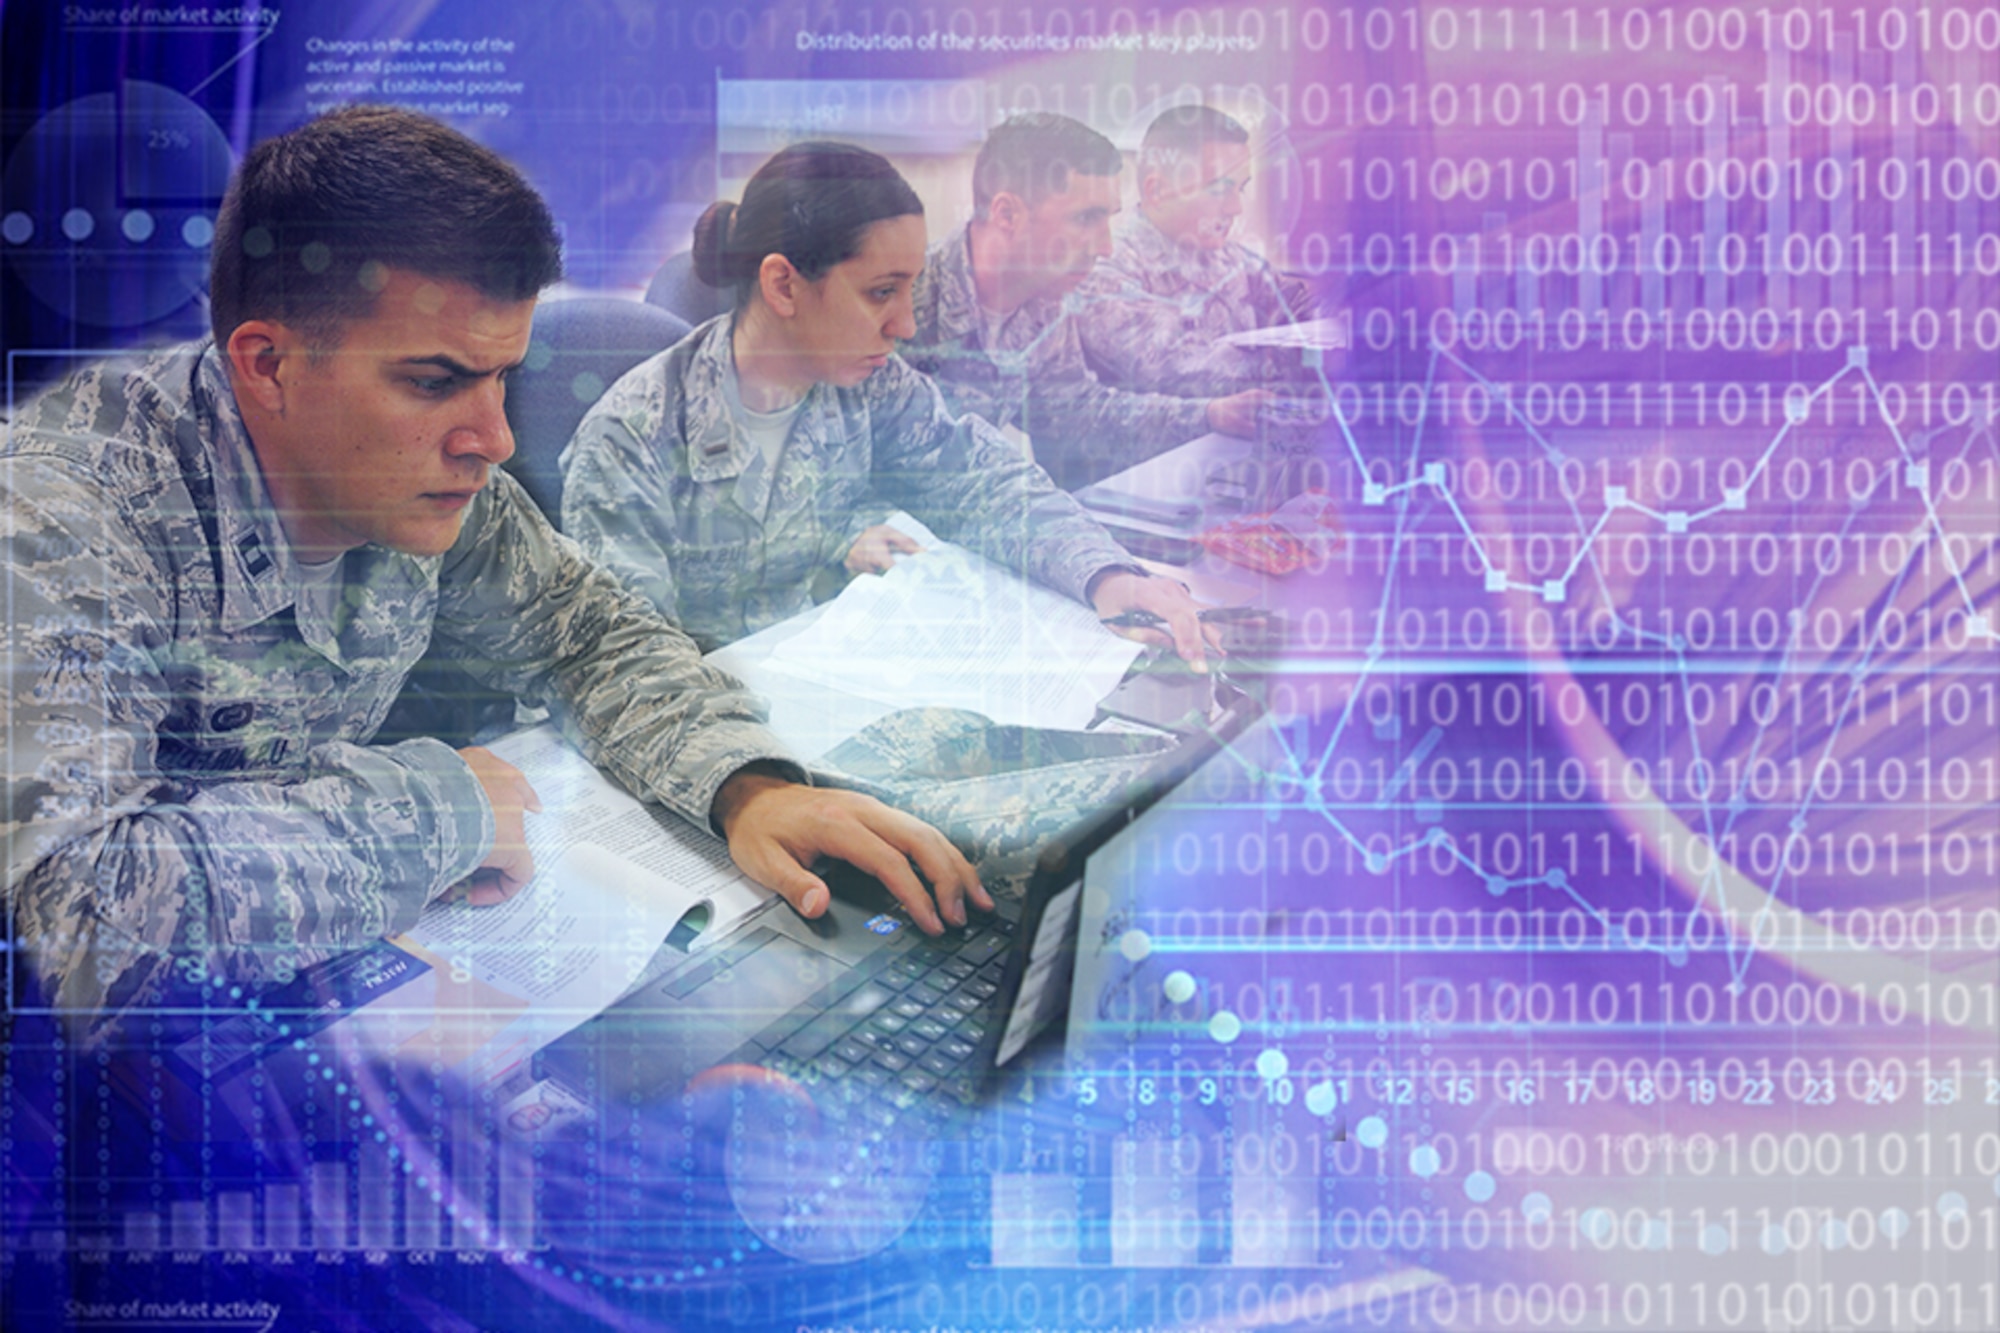 Data analytics can turn data into valuable information for future decision making and make operations more effective and efficient. Researchers at the Air Force Research Laboratory’s 711th Human Performance wing are leveraging a new funding source known as Squadron Innovation Funds to design and build a Human-Centered Data Analytics Environment that will help them store and operationalize huge amounts of both research and operational data. (U.S. Air Force Graphic Illustration/Paul Hartman)